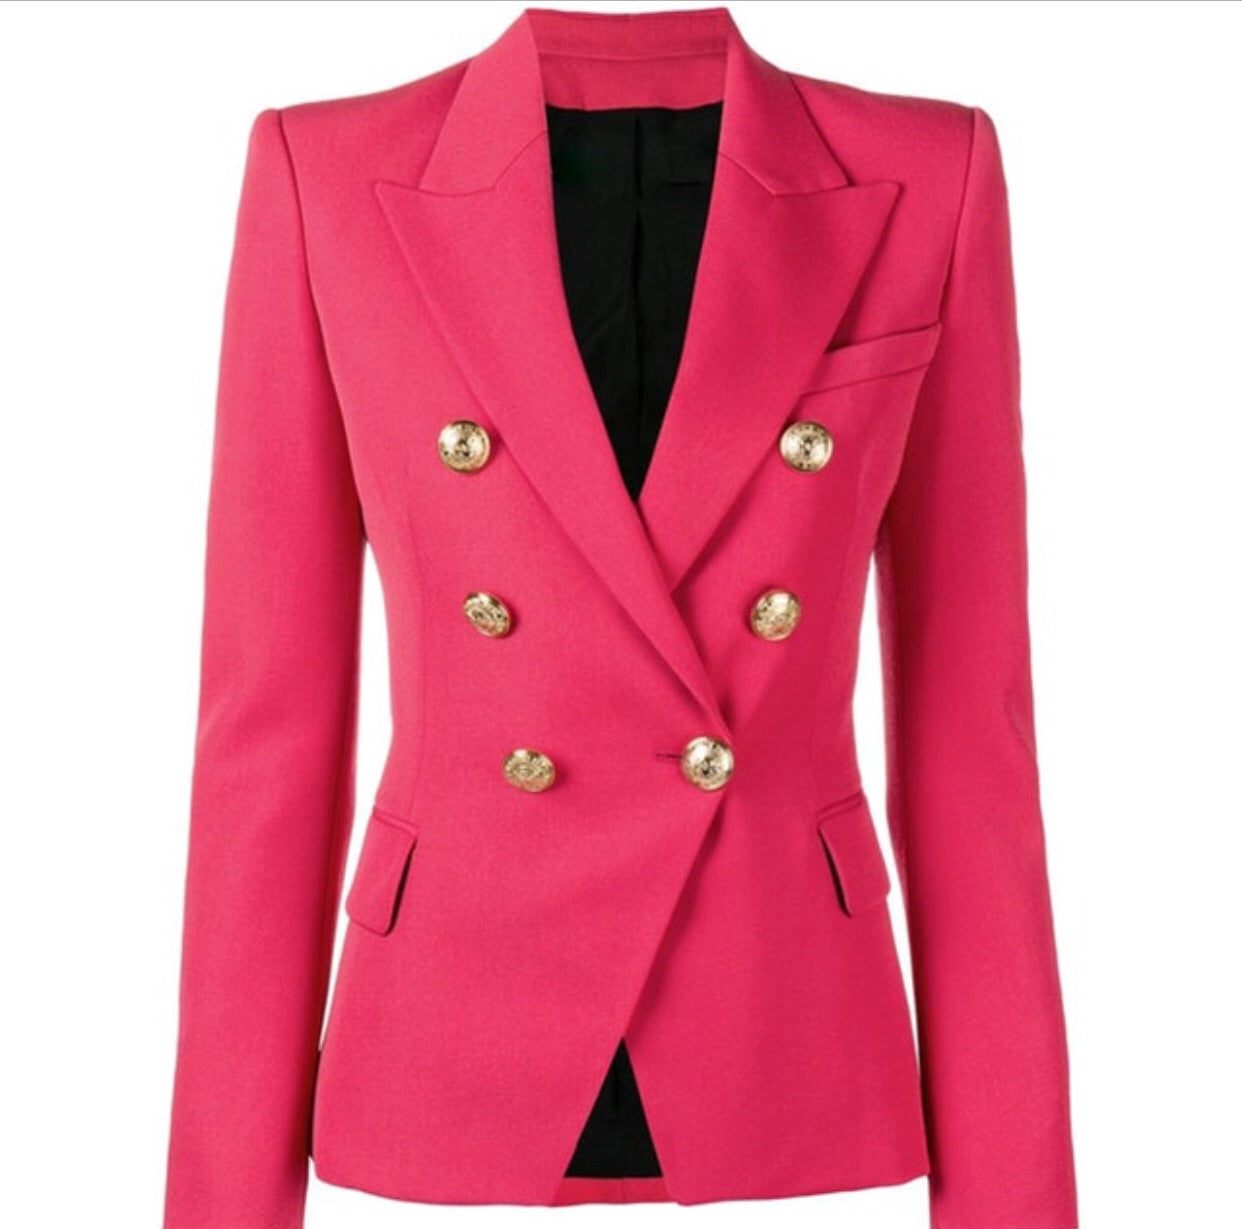 Double Breasted Blazer with Gold Hardware - Hot Pink